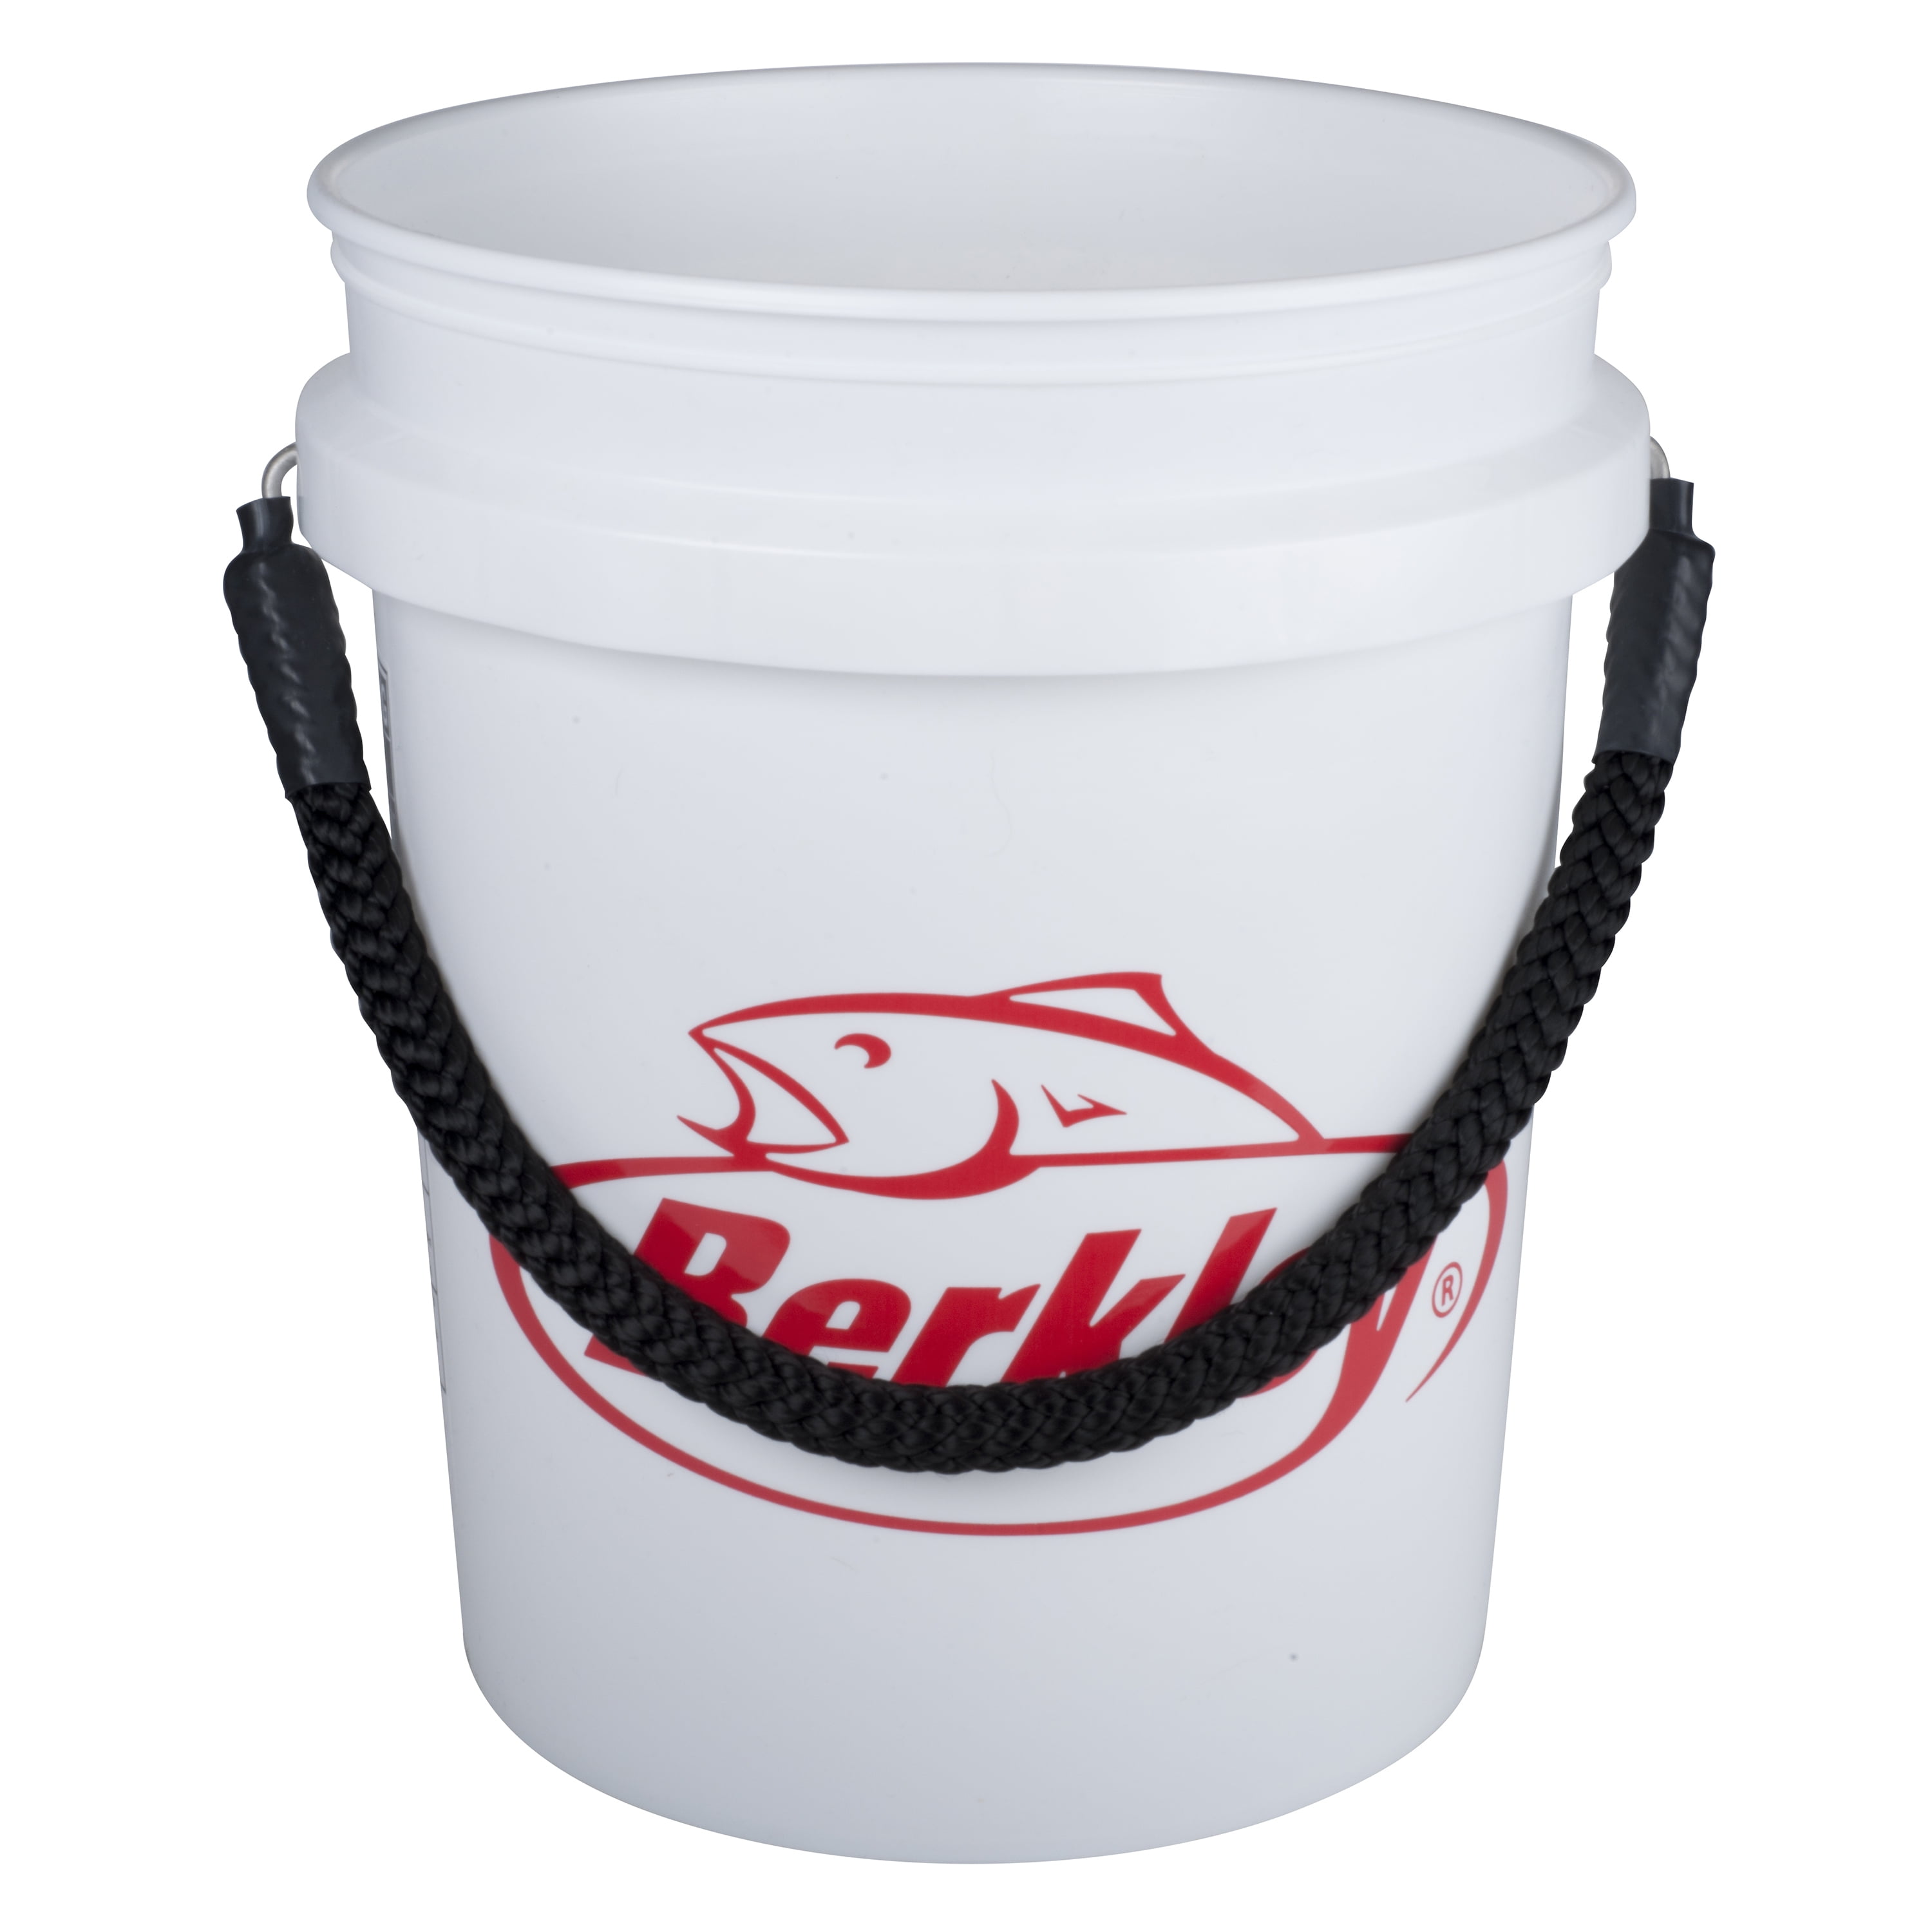 Bass Pro Shops Logo 5-Gallon Plastic Bucket with Rope Handle